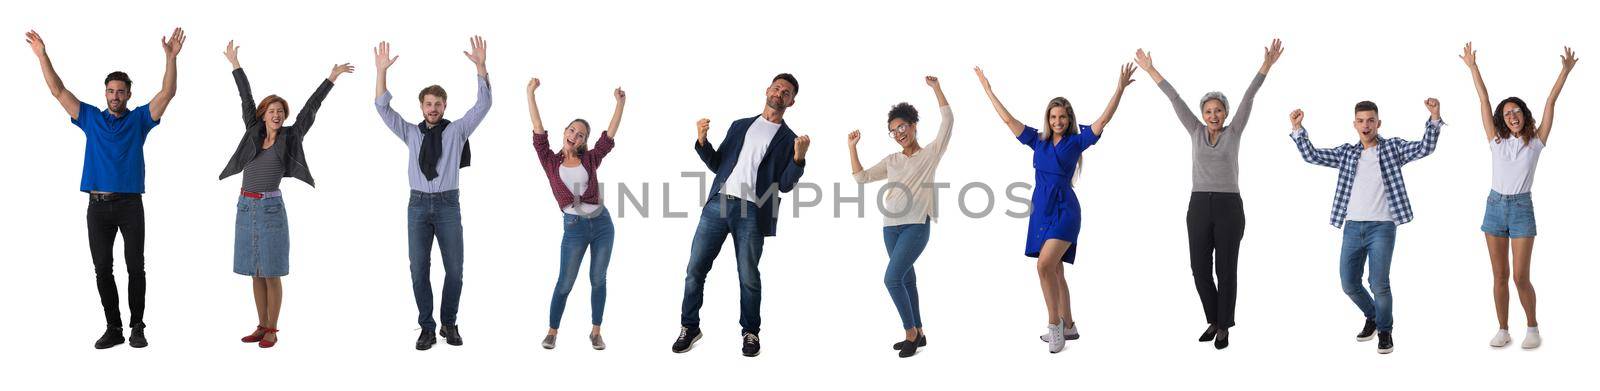 Collection of full length portrait of people in casual clothes with raised hands isolated on white background